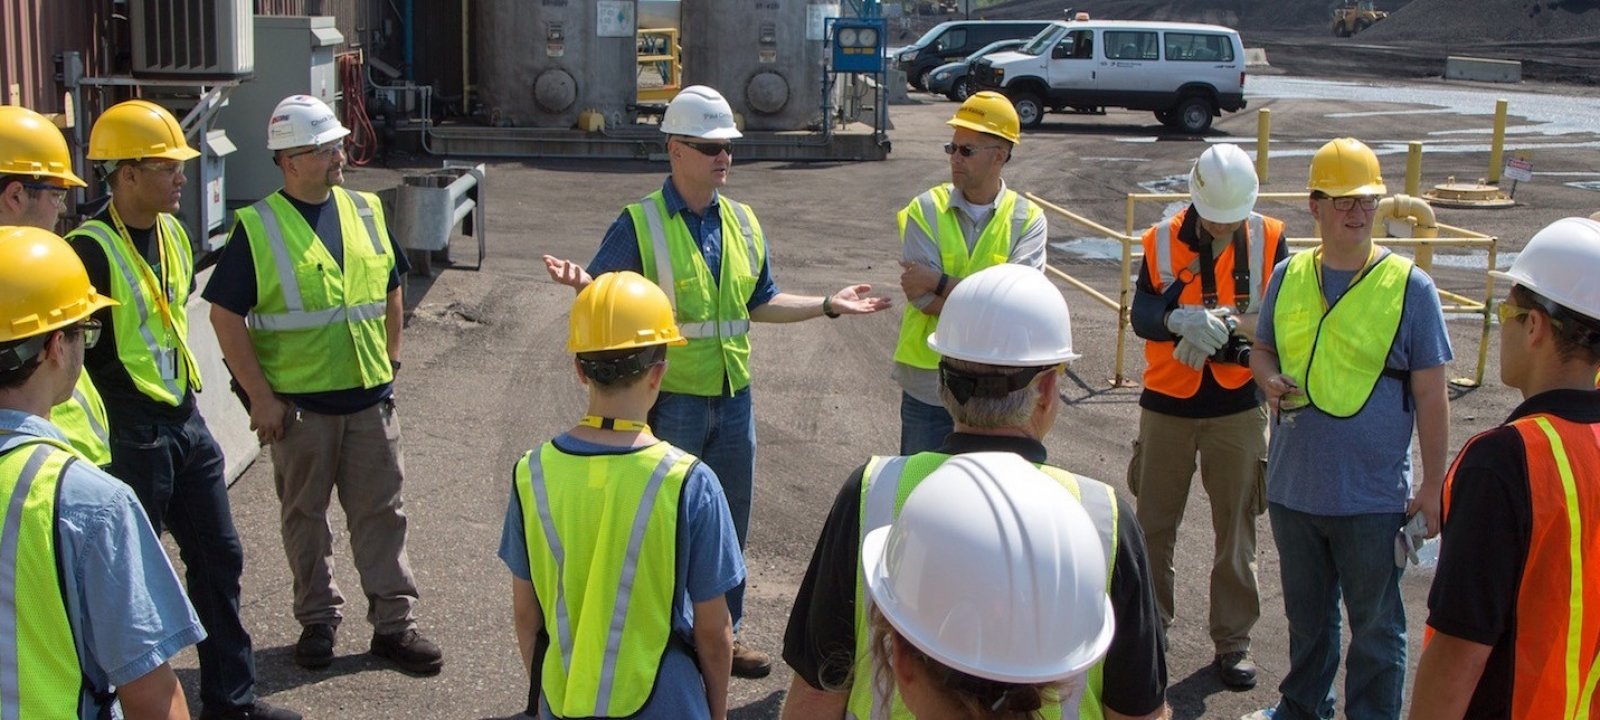 Transportation Careers, showing students learning from instructor in the field.